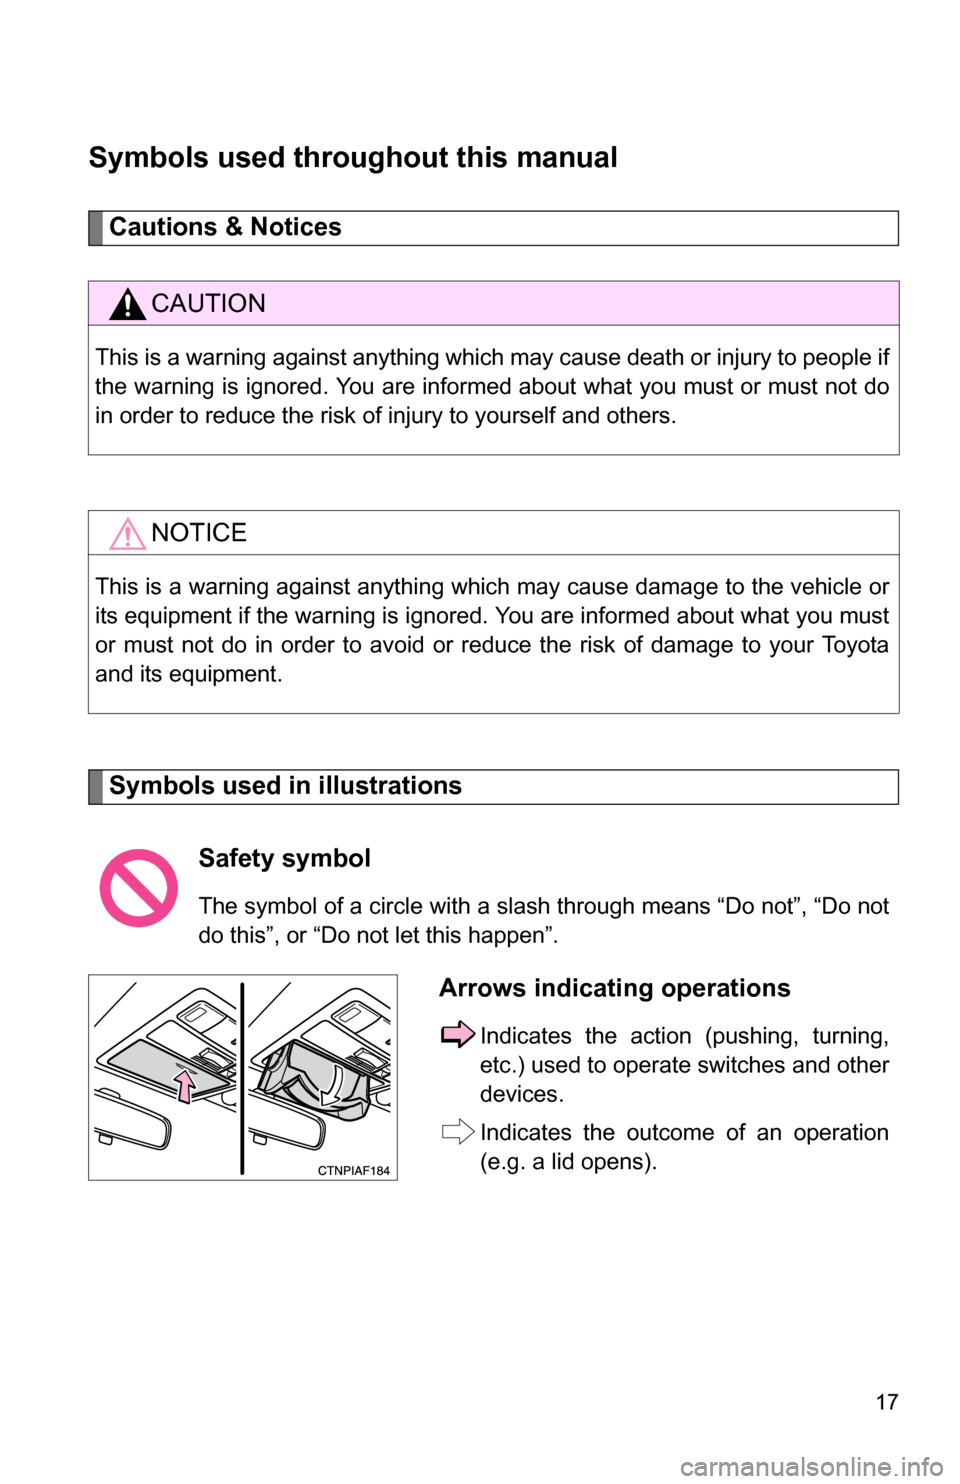 TOYOTA COROLLA 2010 10.G Owners Manual 17
Symbols used throughout this manual
Cautions & Notices 
Symbols used in illustrations
CAUTION
This is a warning against anything which may cause death or injury to people if
the warning is ignored.